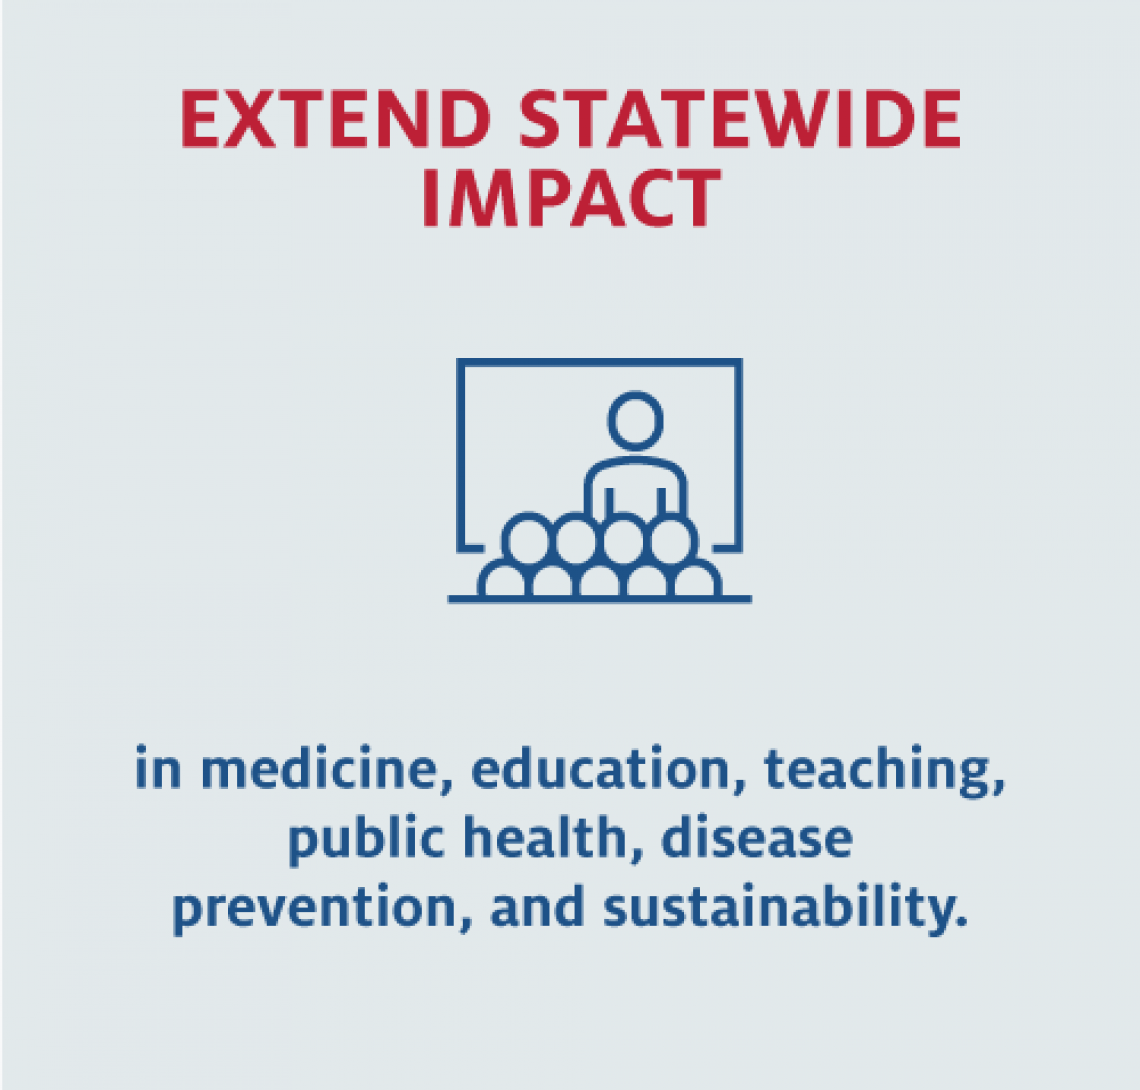 Extend Statewide Impact